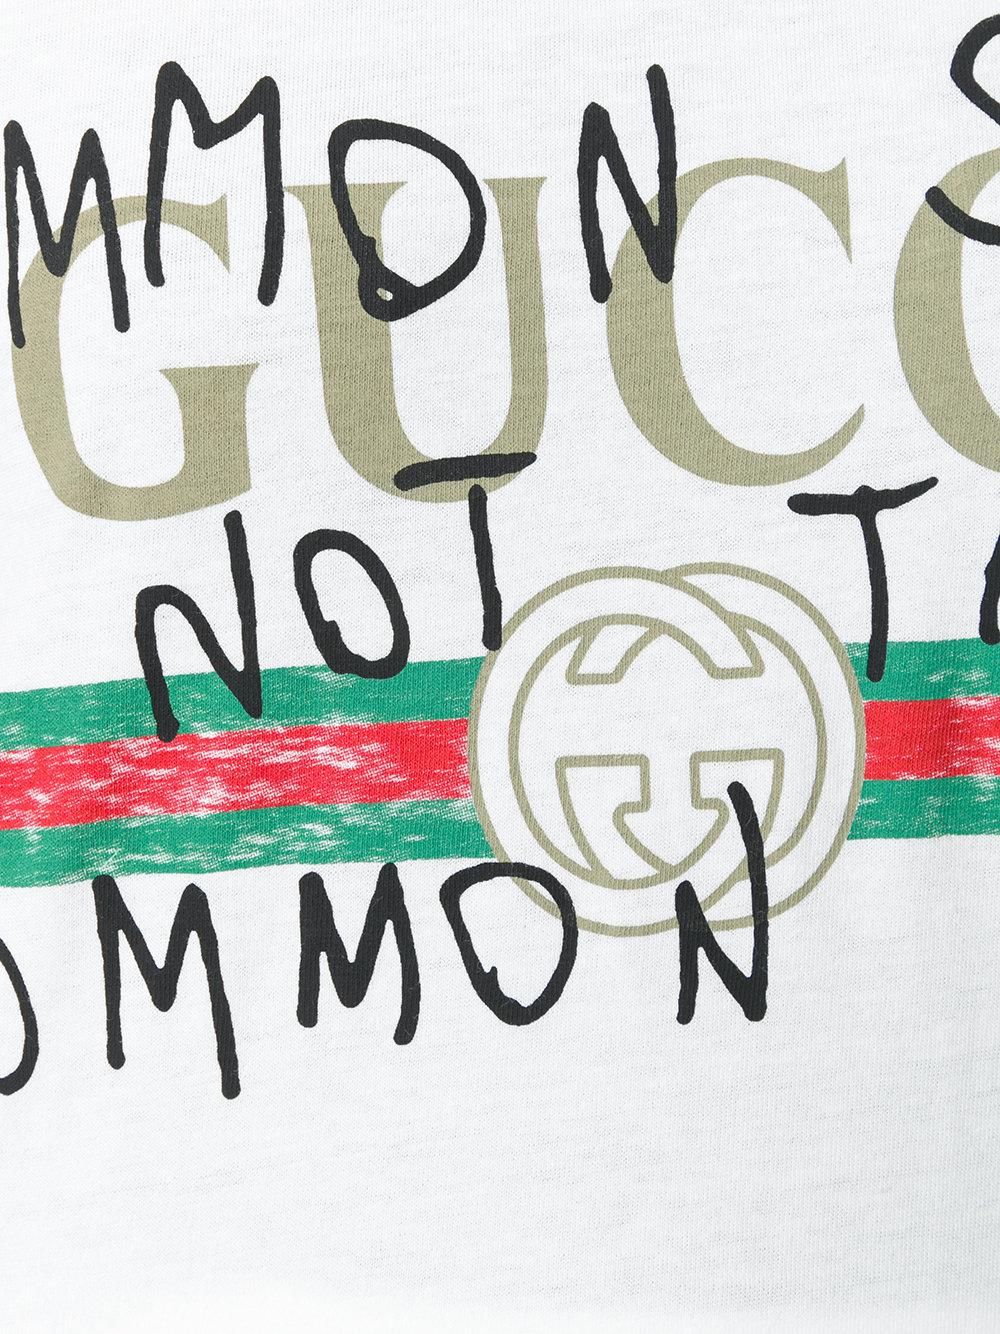 Gucci Coco Capitán Vintage Logo T-shirt in White | Lyst